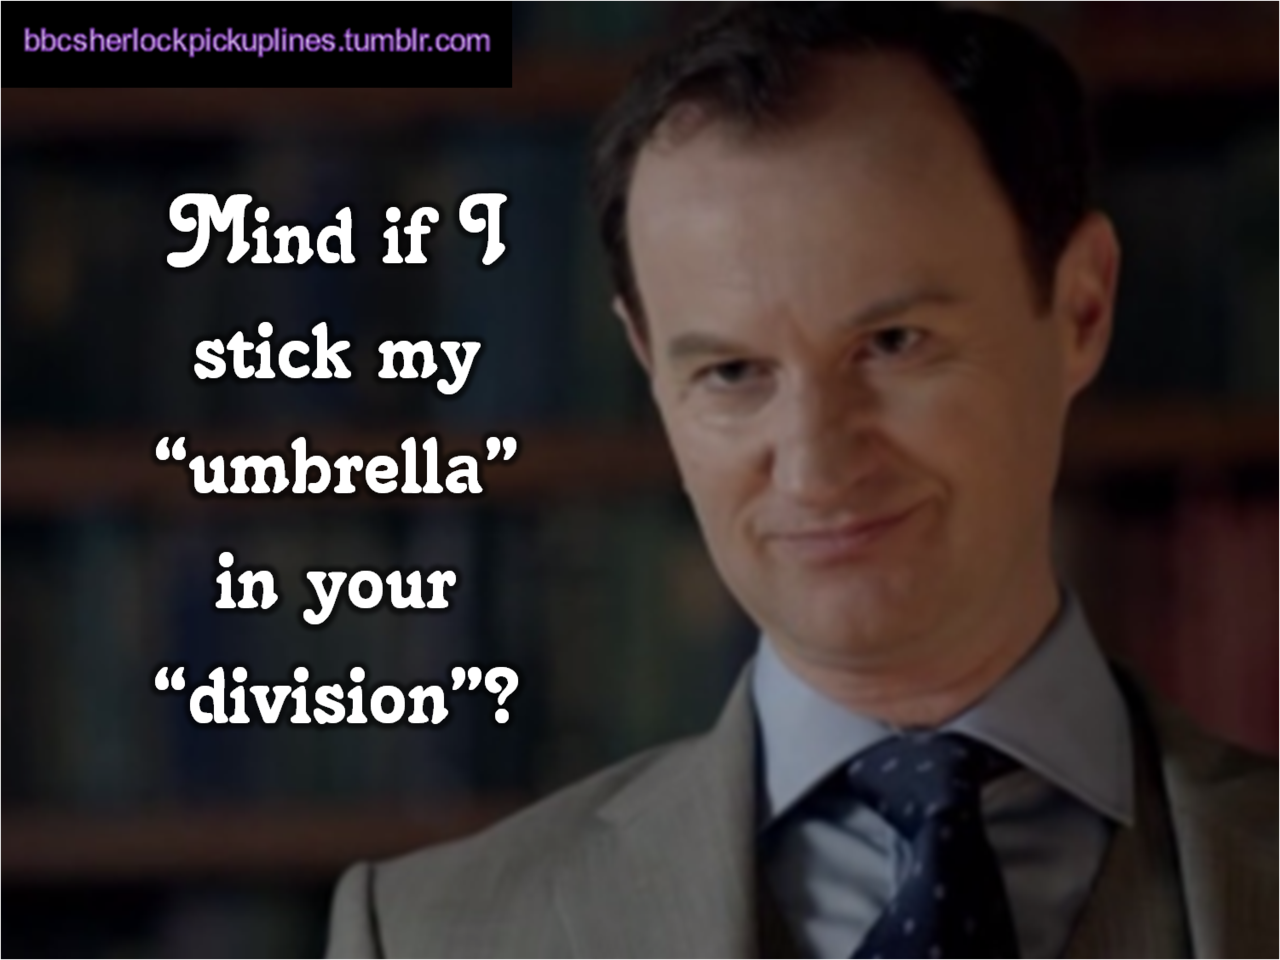 The best of series two references, from BBC Sherlock pick-up lines.